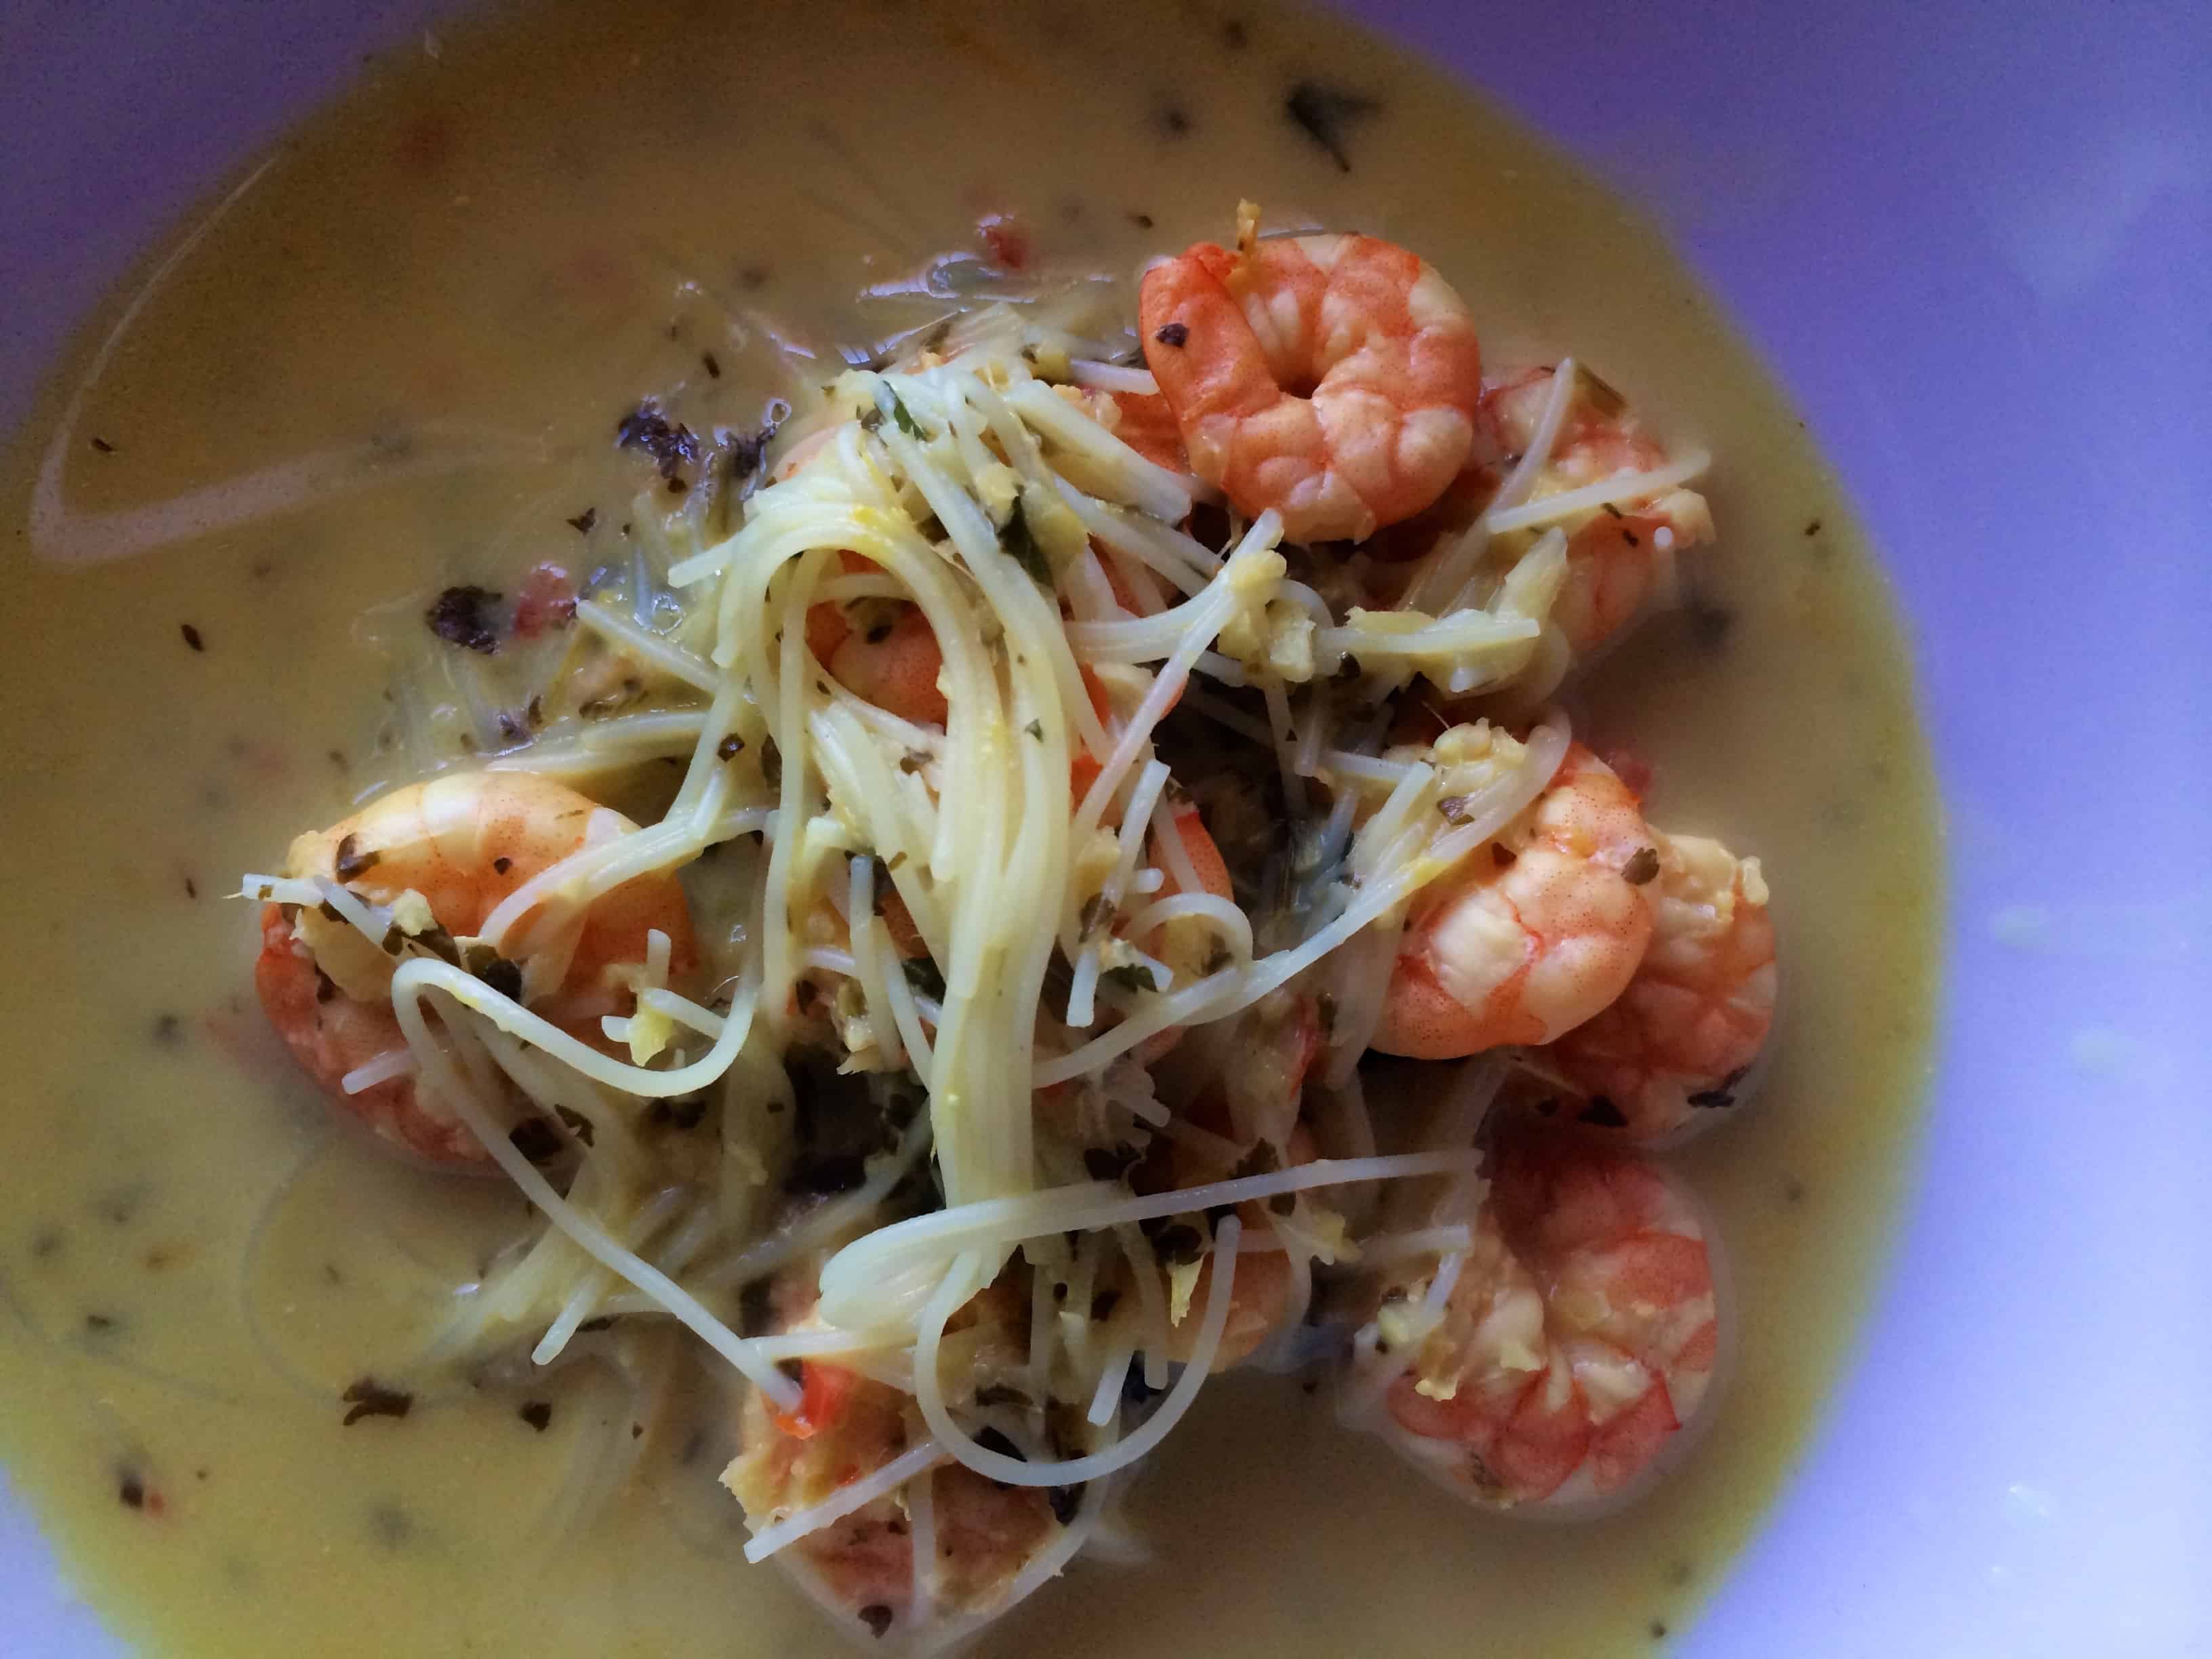 Delicious soup with Thai flavours, prawns and noodles